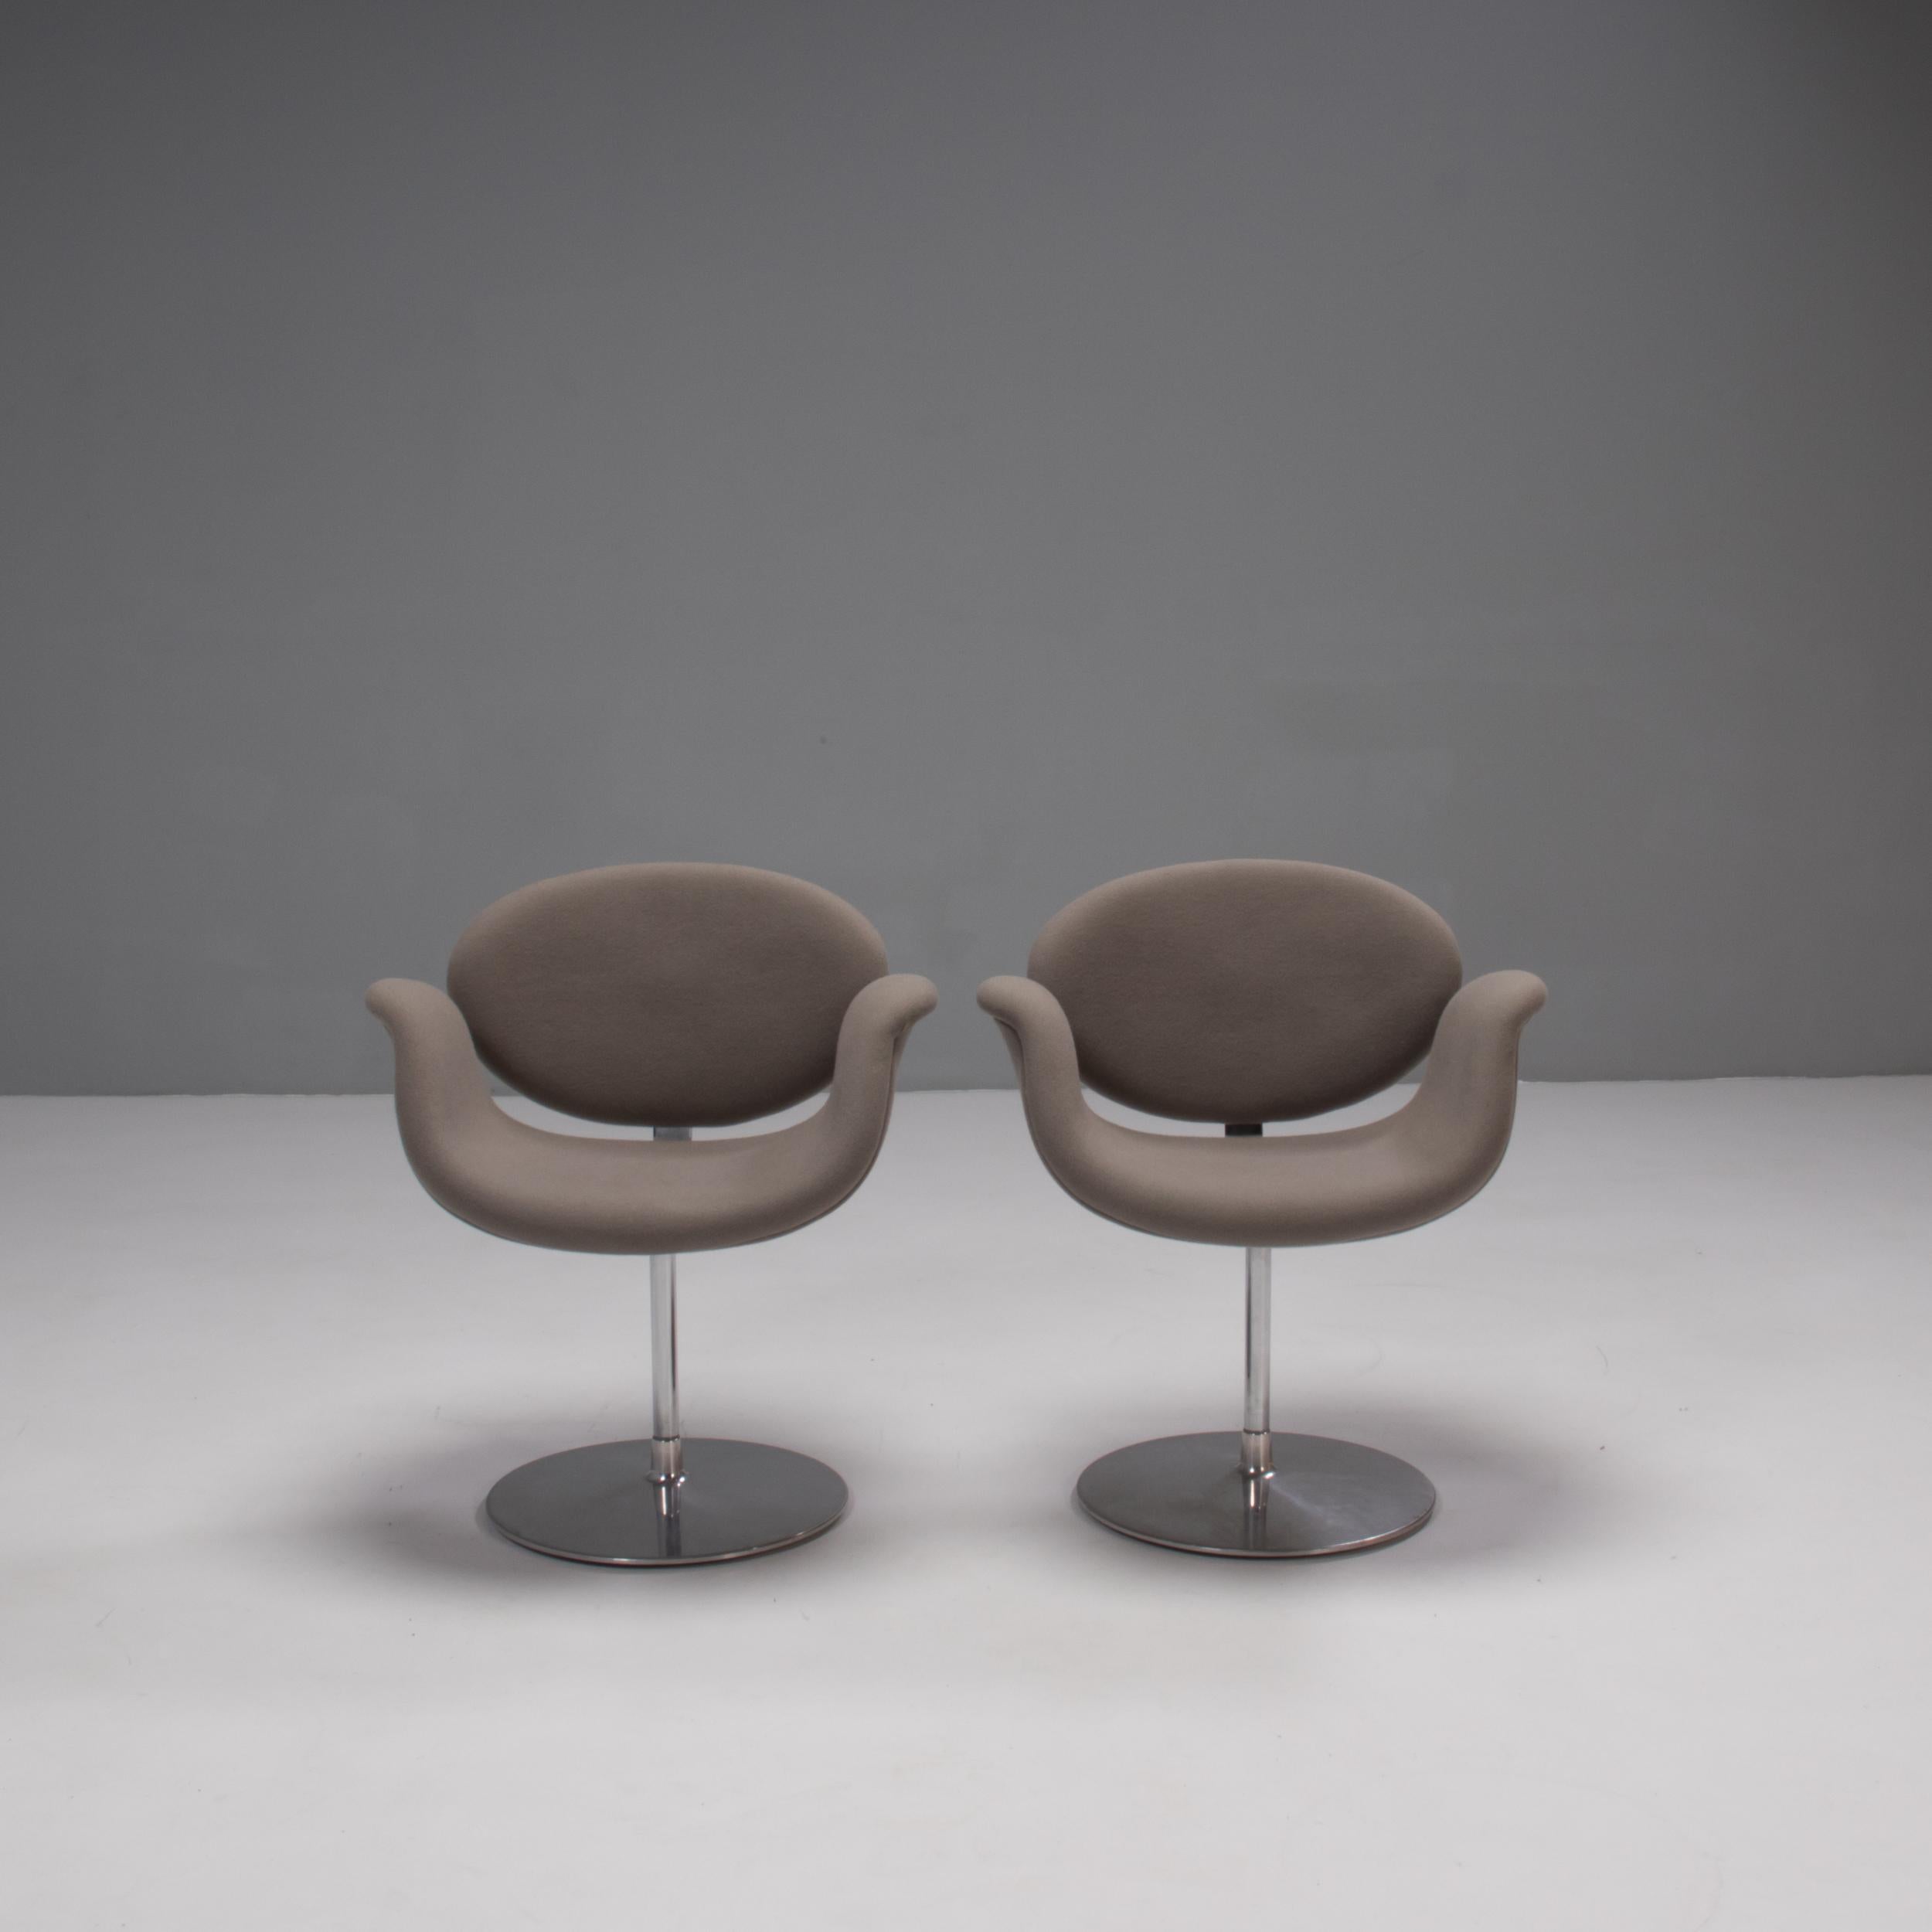 Originally designed by Pierre Paulin in 1965, the Little Tulip Chair is a design icon.

Inspired by the flower, the chair has a Tulip-esque silhouette with a petal shaped seat which curves out to create armrests.

Upholstered in grey fabric, the